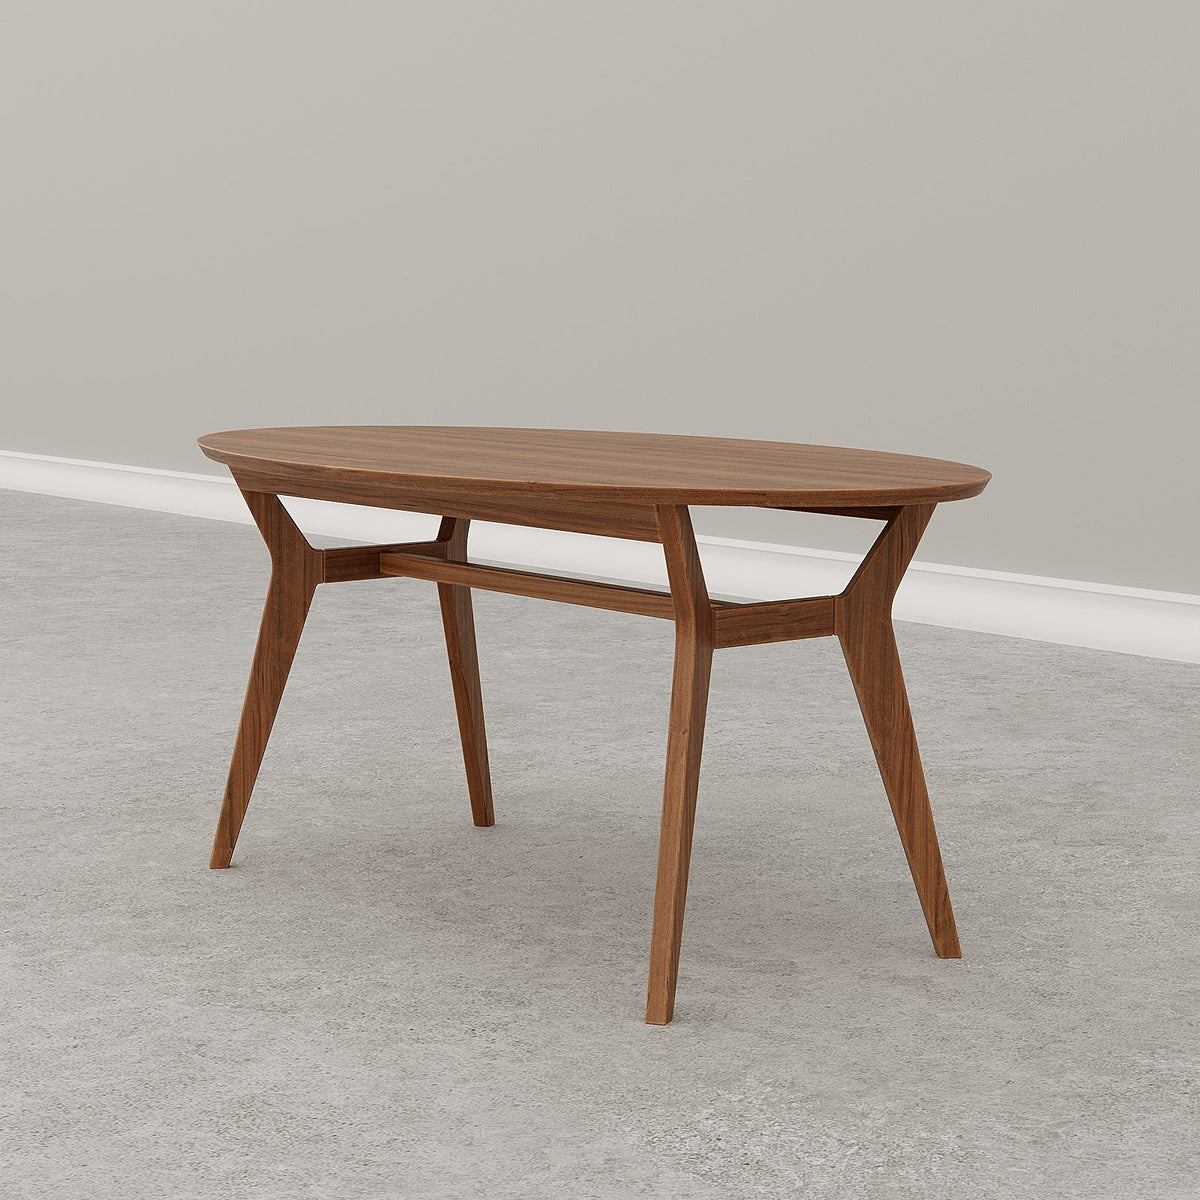 Tonic Dining Table / 170 x 90 CM - Walls Nation